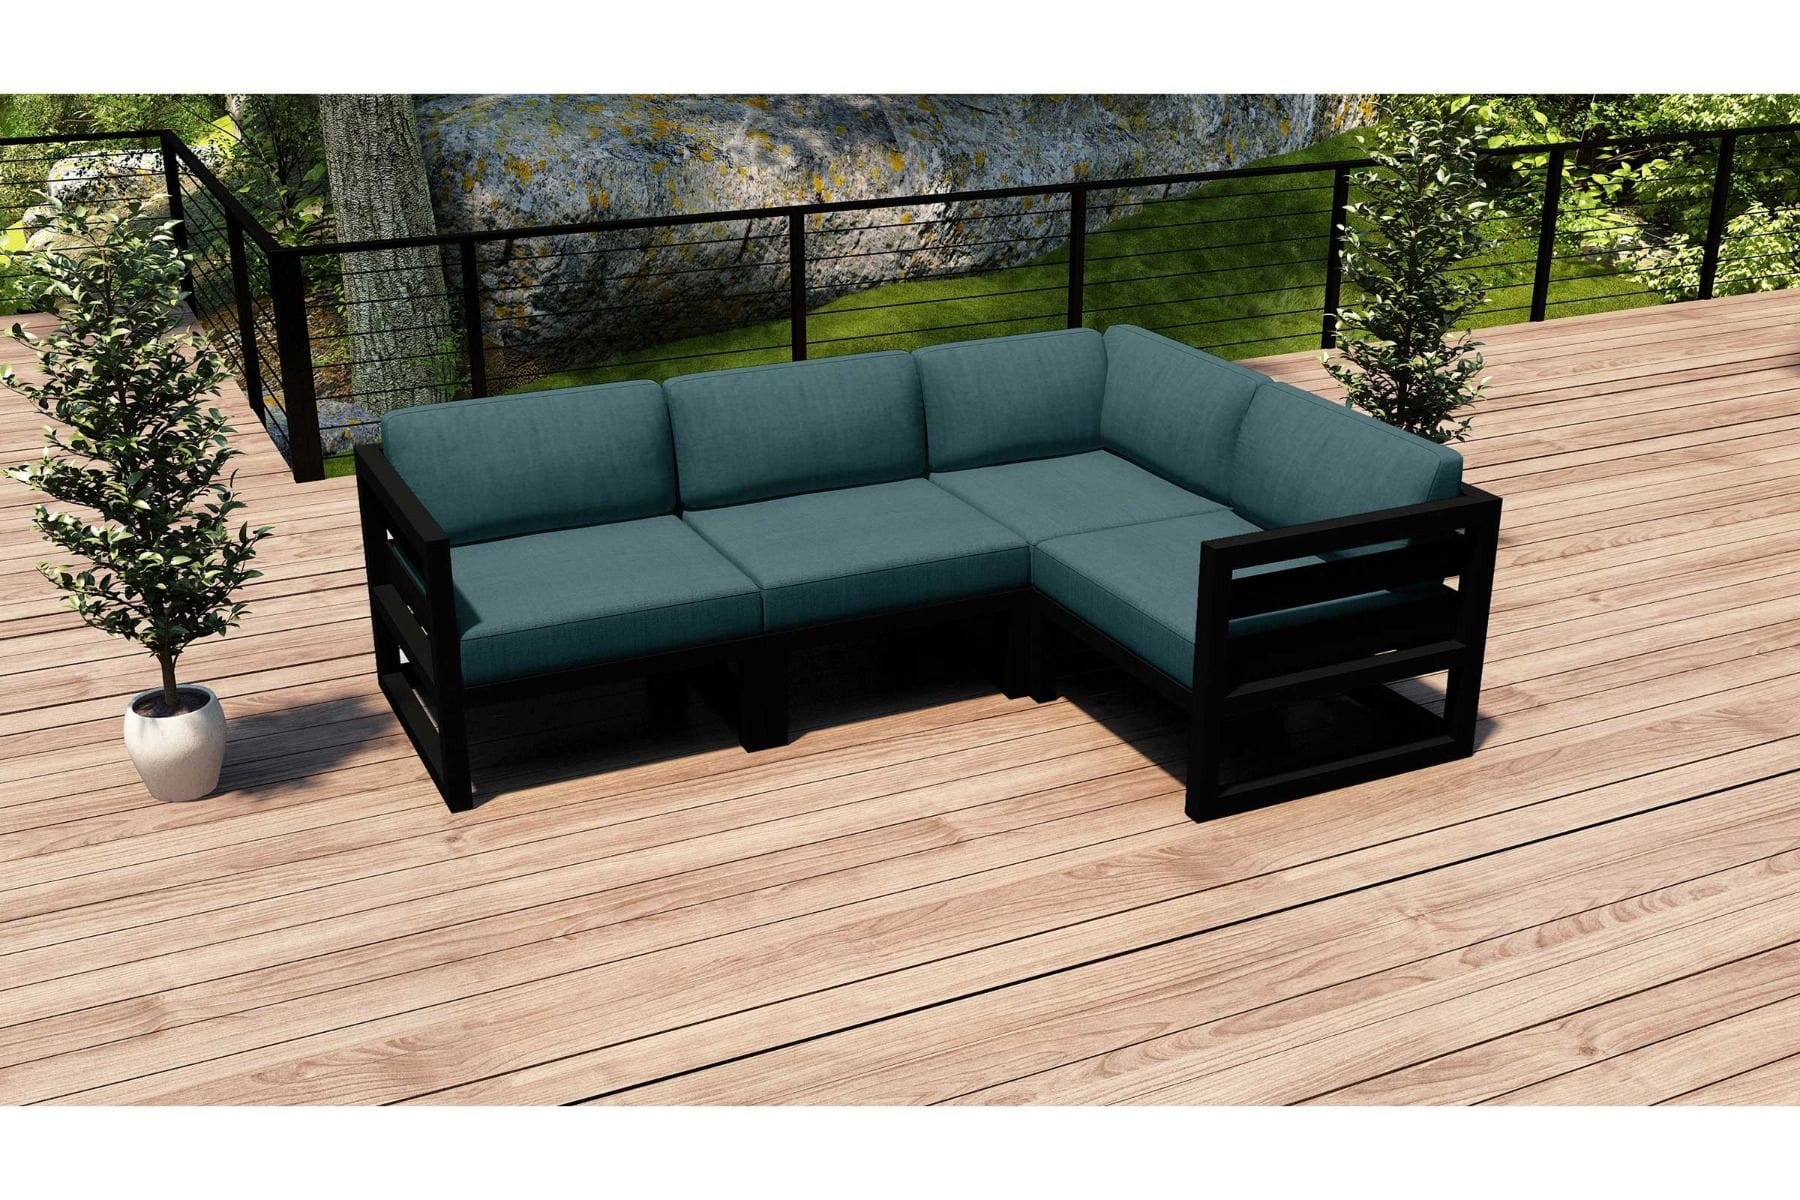 Harmonia Living Outdoor Sectional Cast Lagoon (CL) Harmonia Living - Avion 4 Piece Sectional Set | Corner, Middle, Left and Right | HL-AVN-BK-4SEC